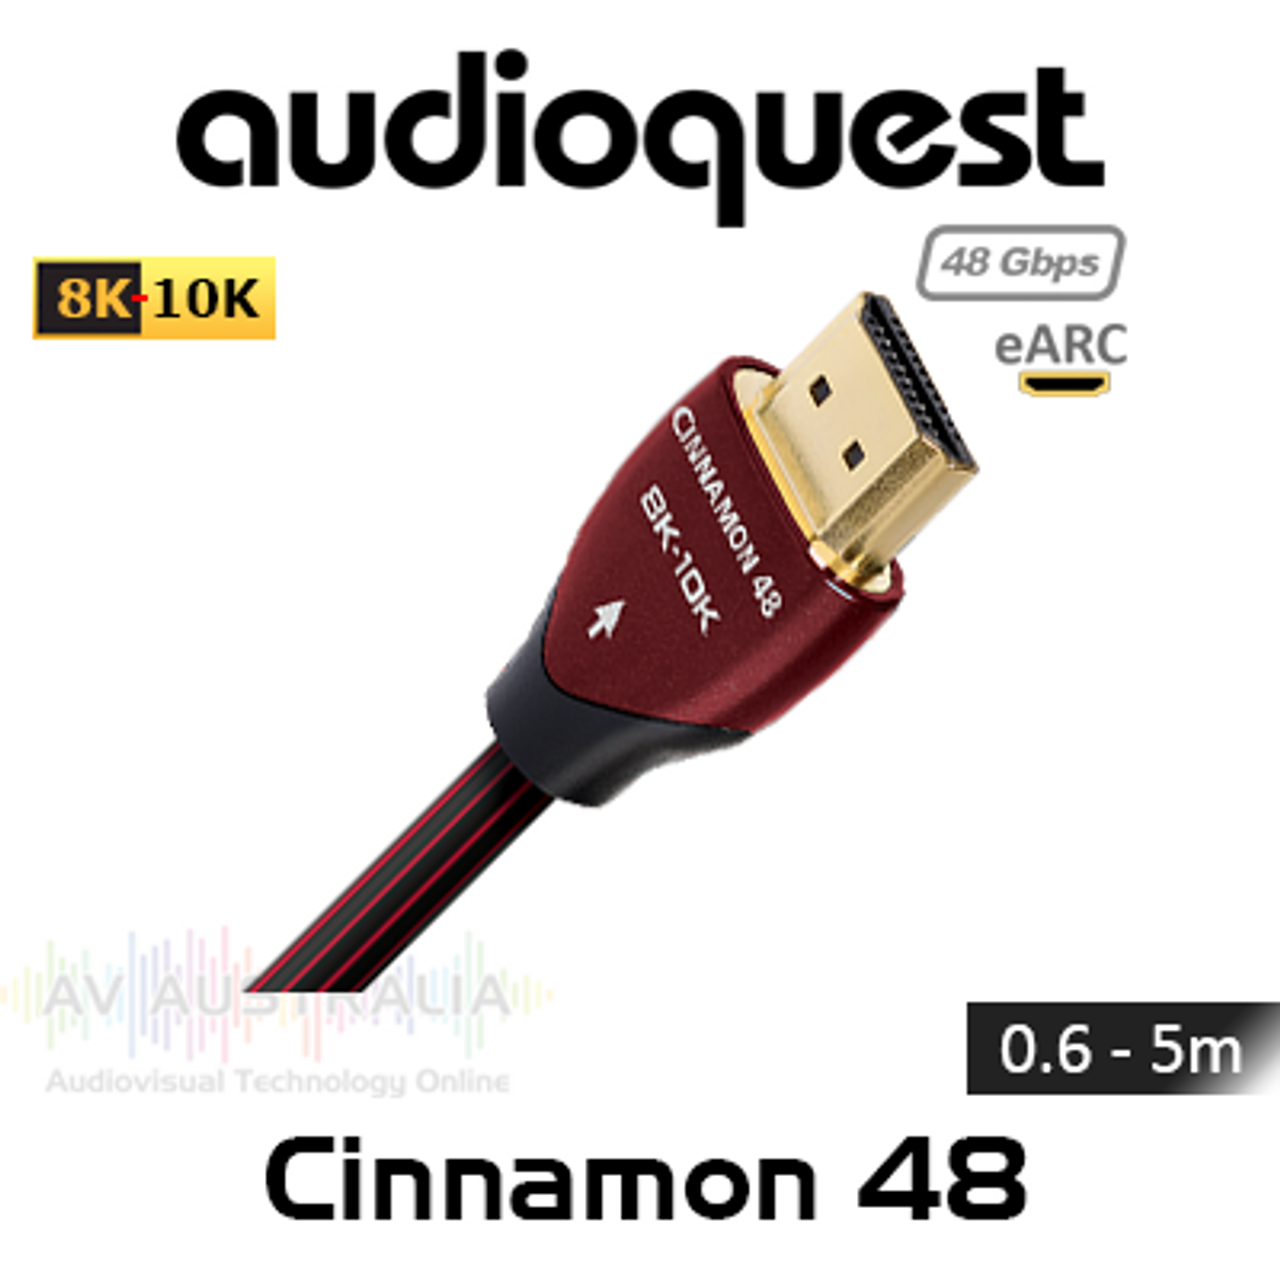 AudioQuest Cinnamon 8K/10K 48Gbps HDMI Cable